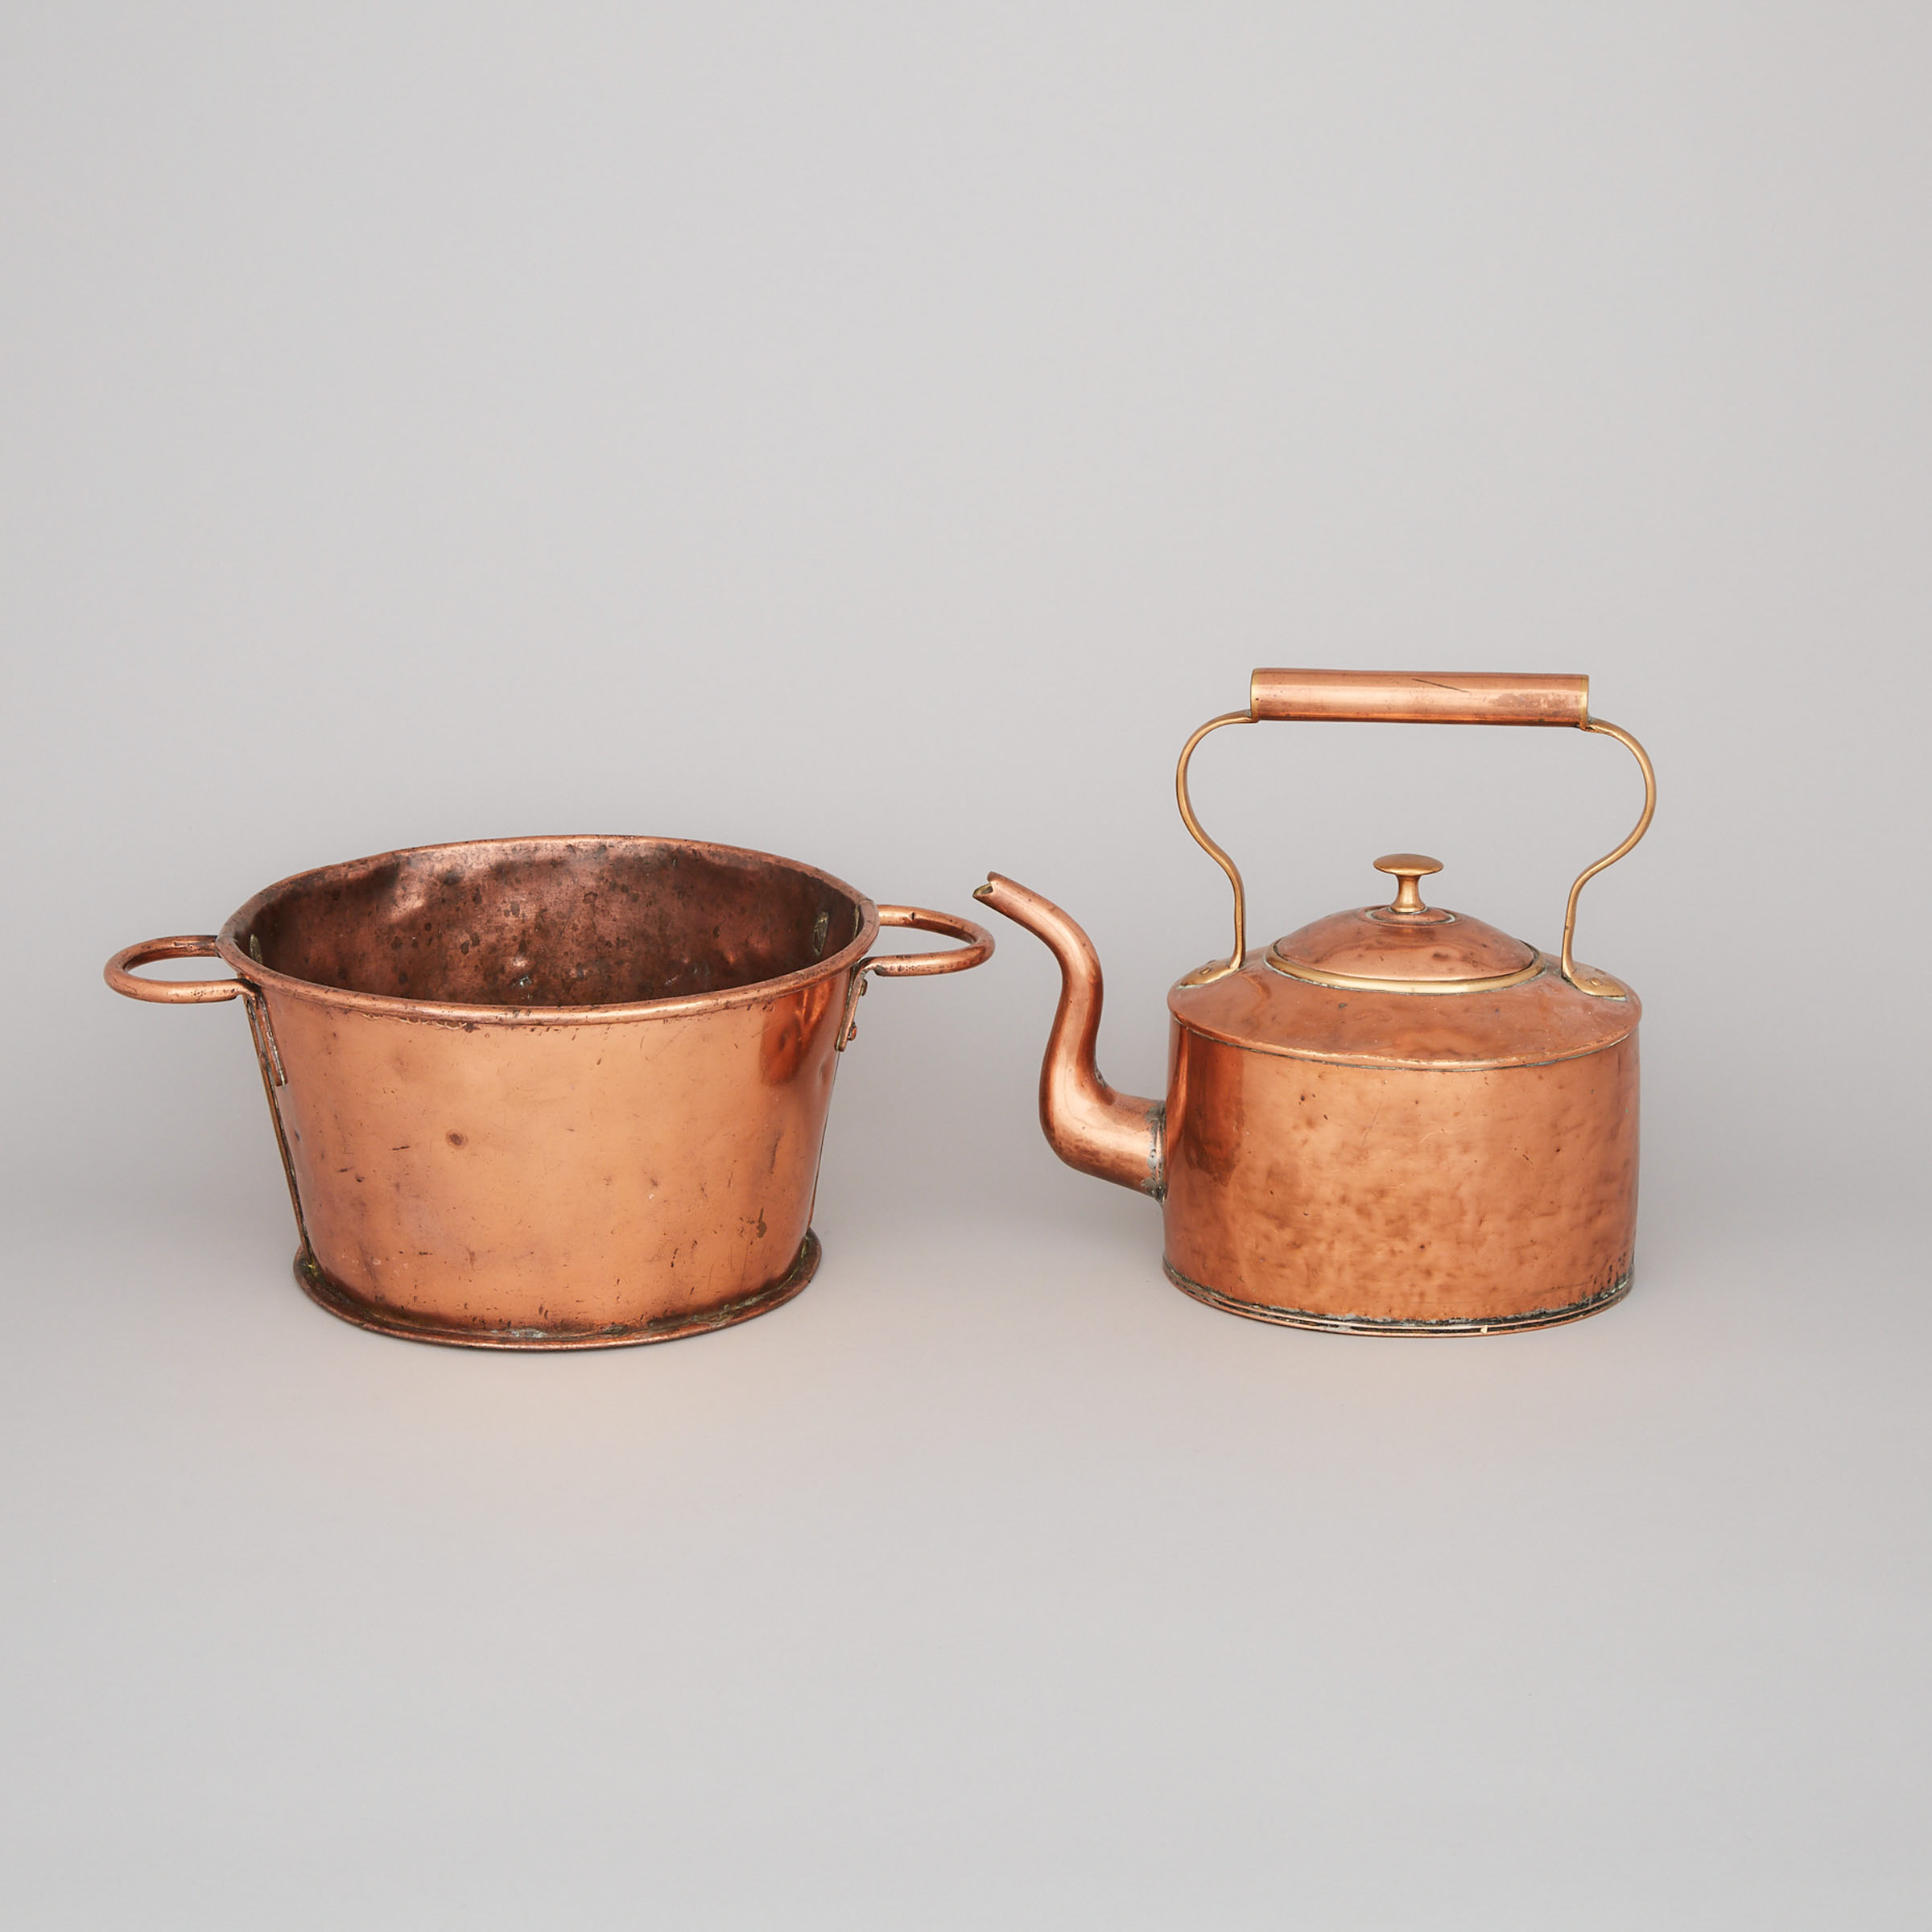 Two Victorian Copper Kitchen Utensils: an Oval Kettle and a Maslin Pan, 19th century